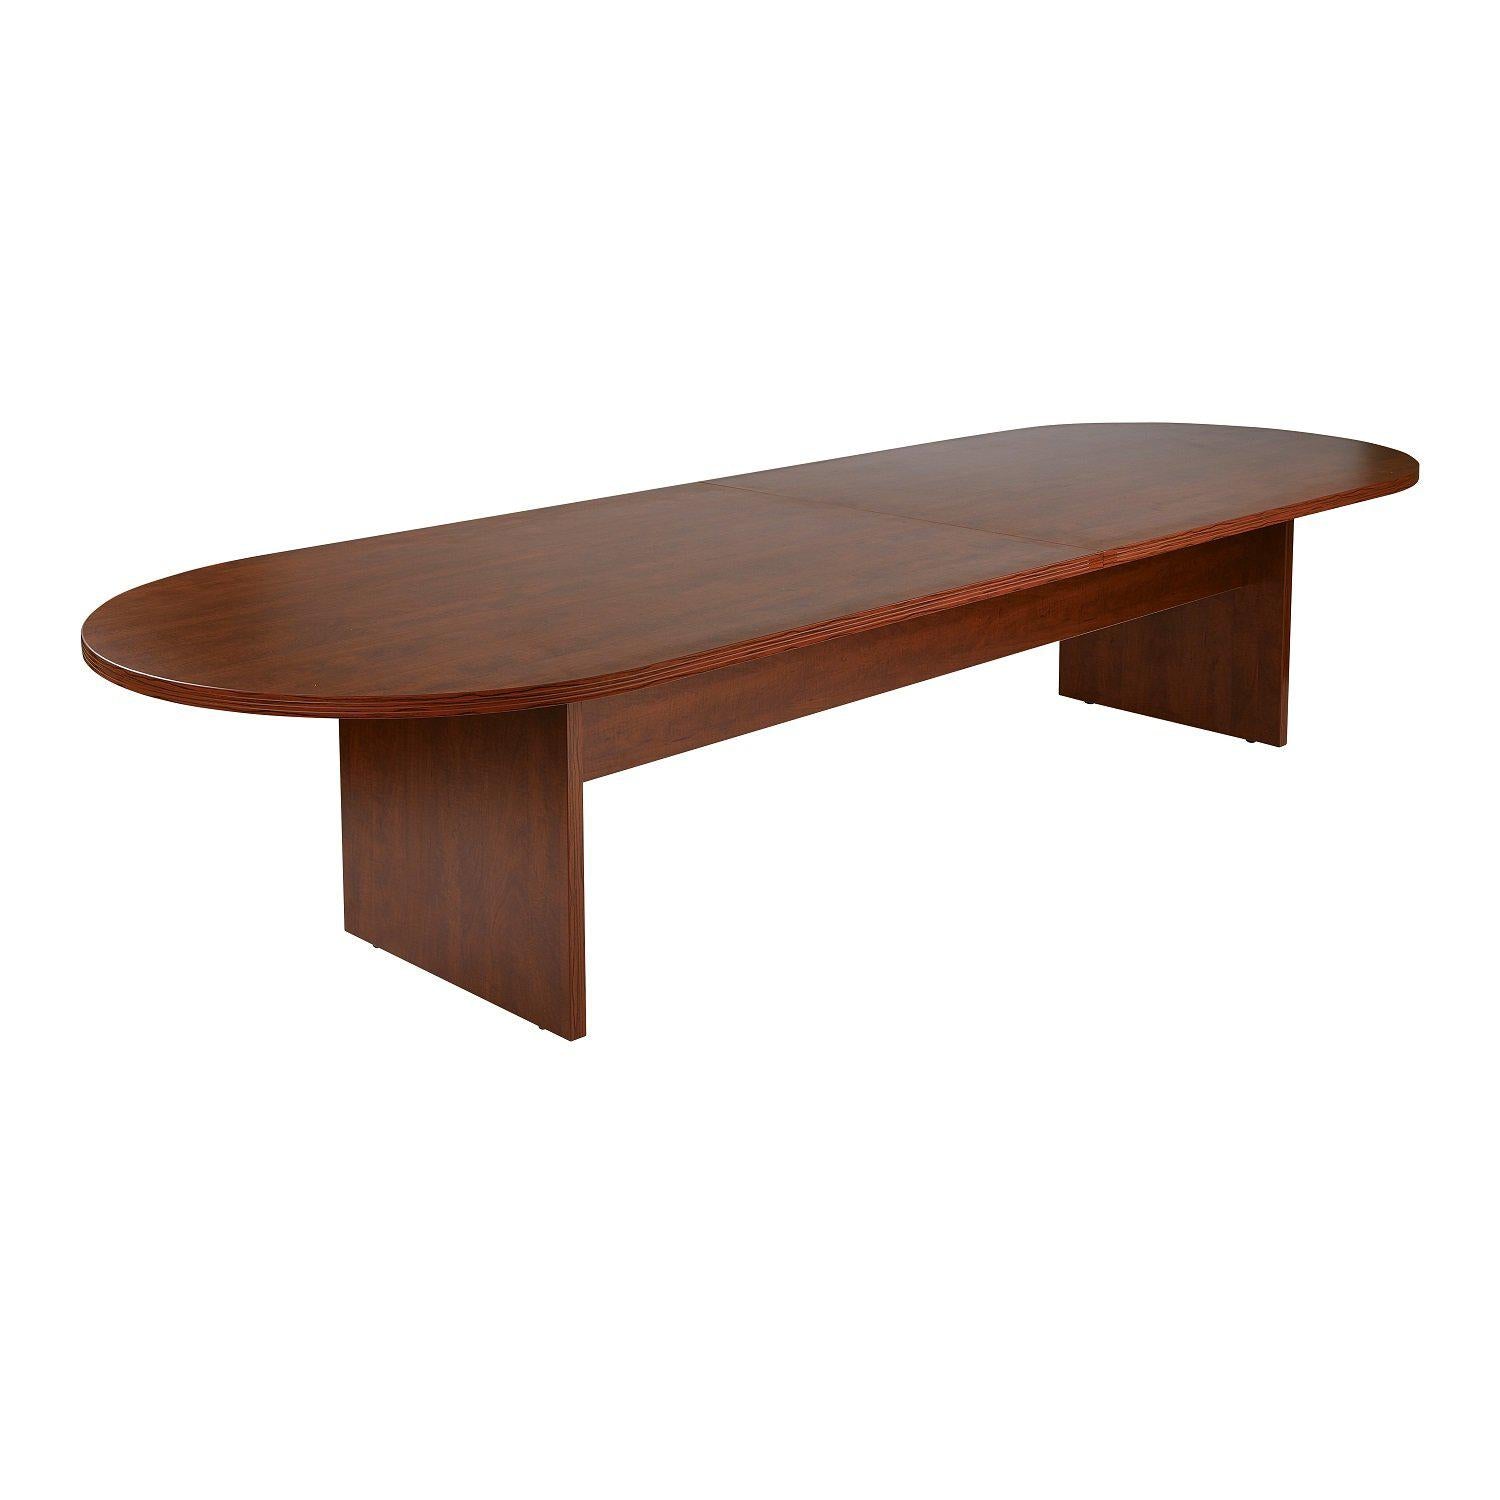 Napa Racetrack Conference Table 144" x 48" x 29" H